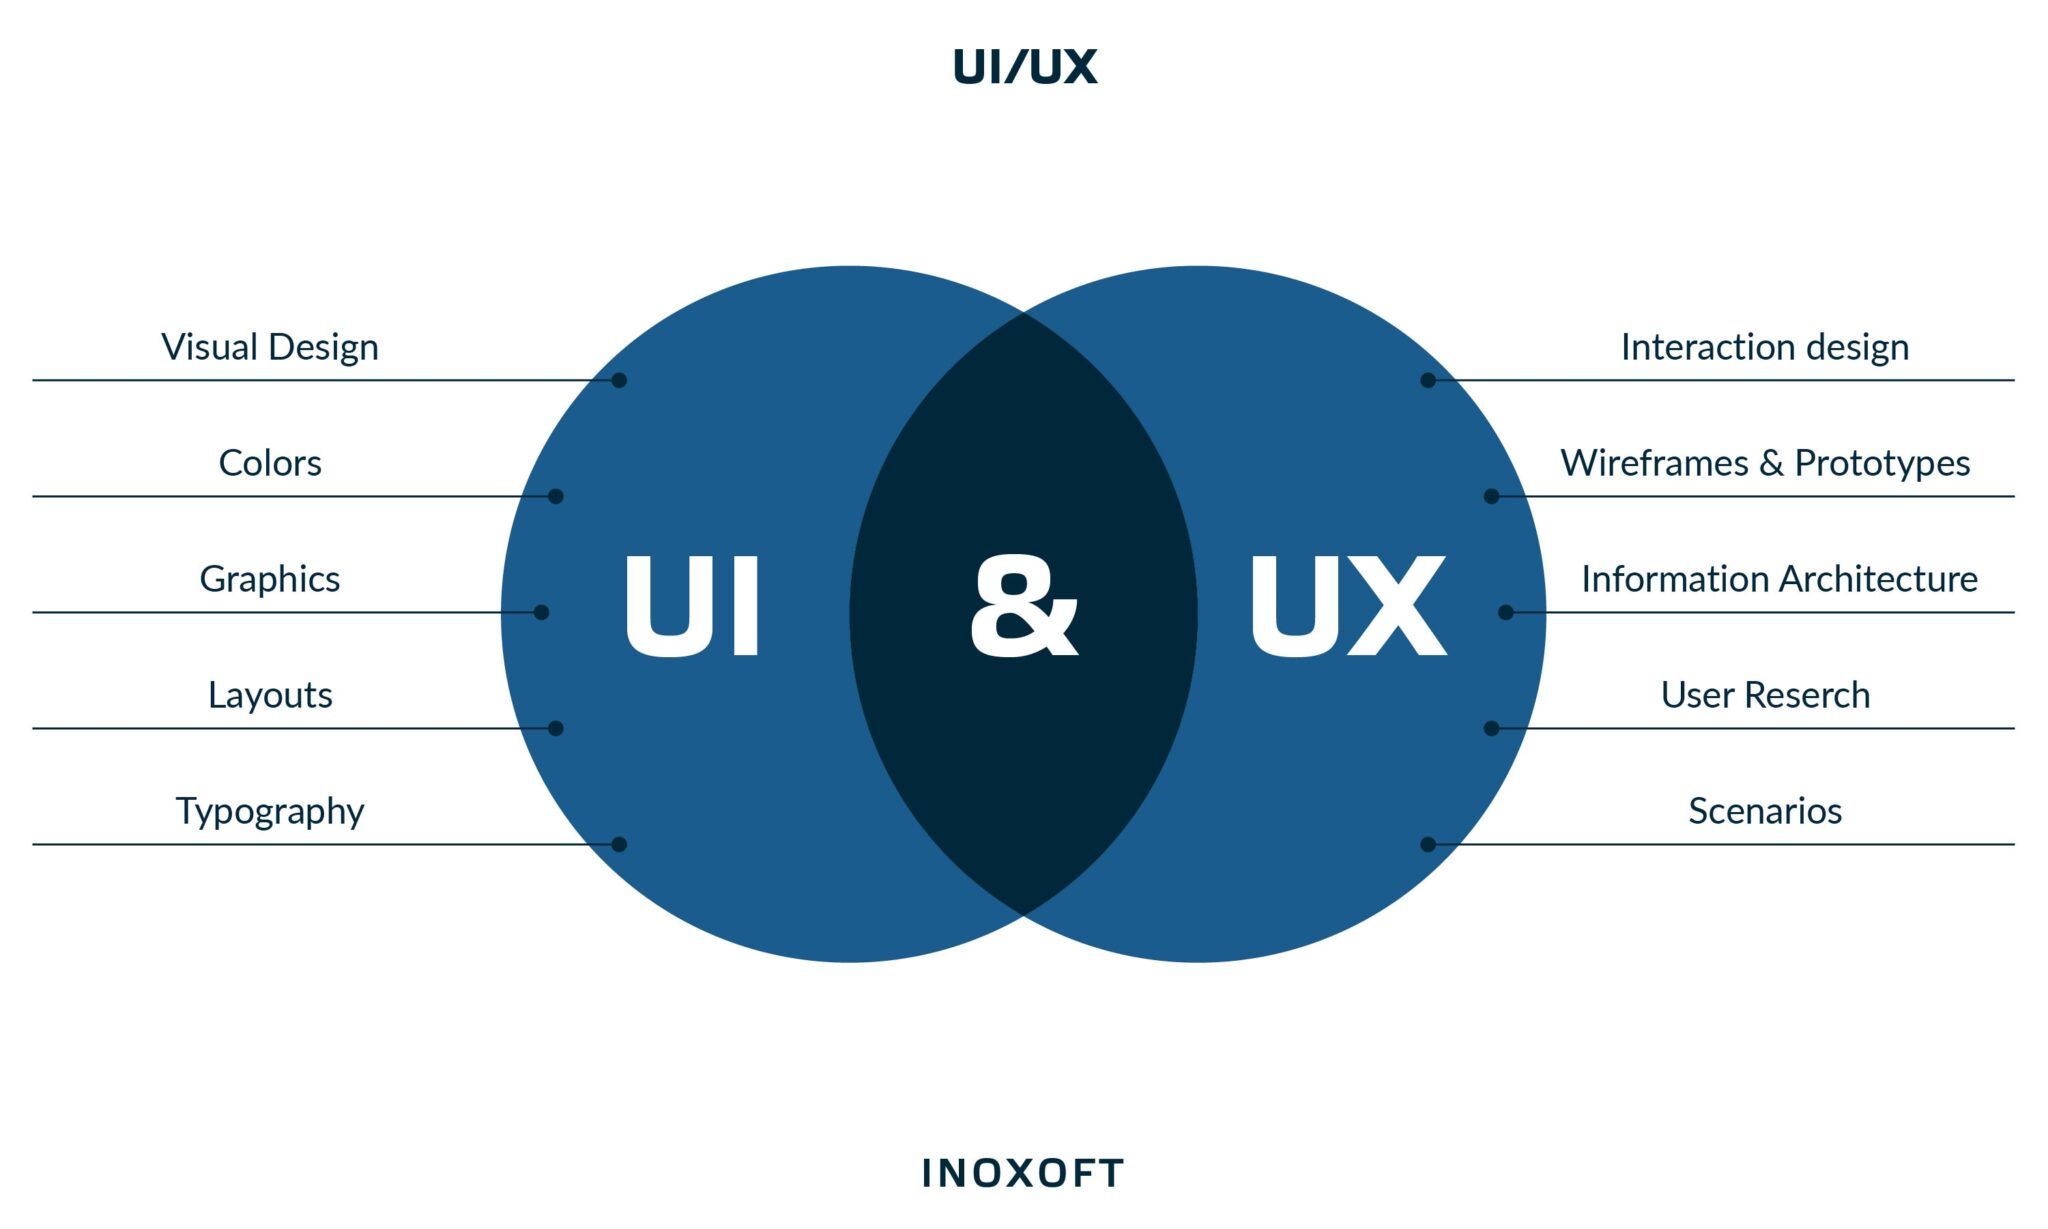 What UI/UX design consists of